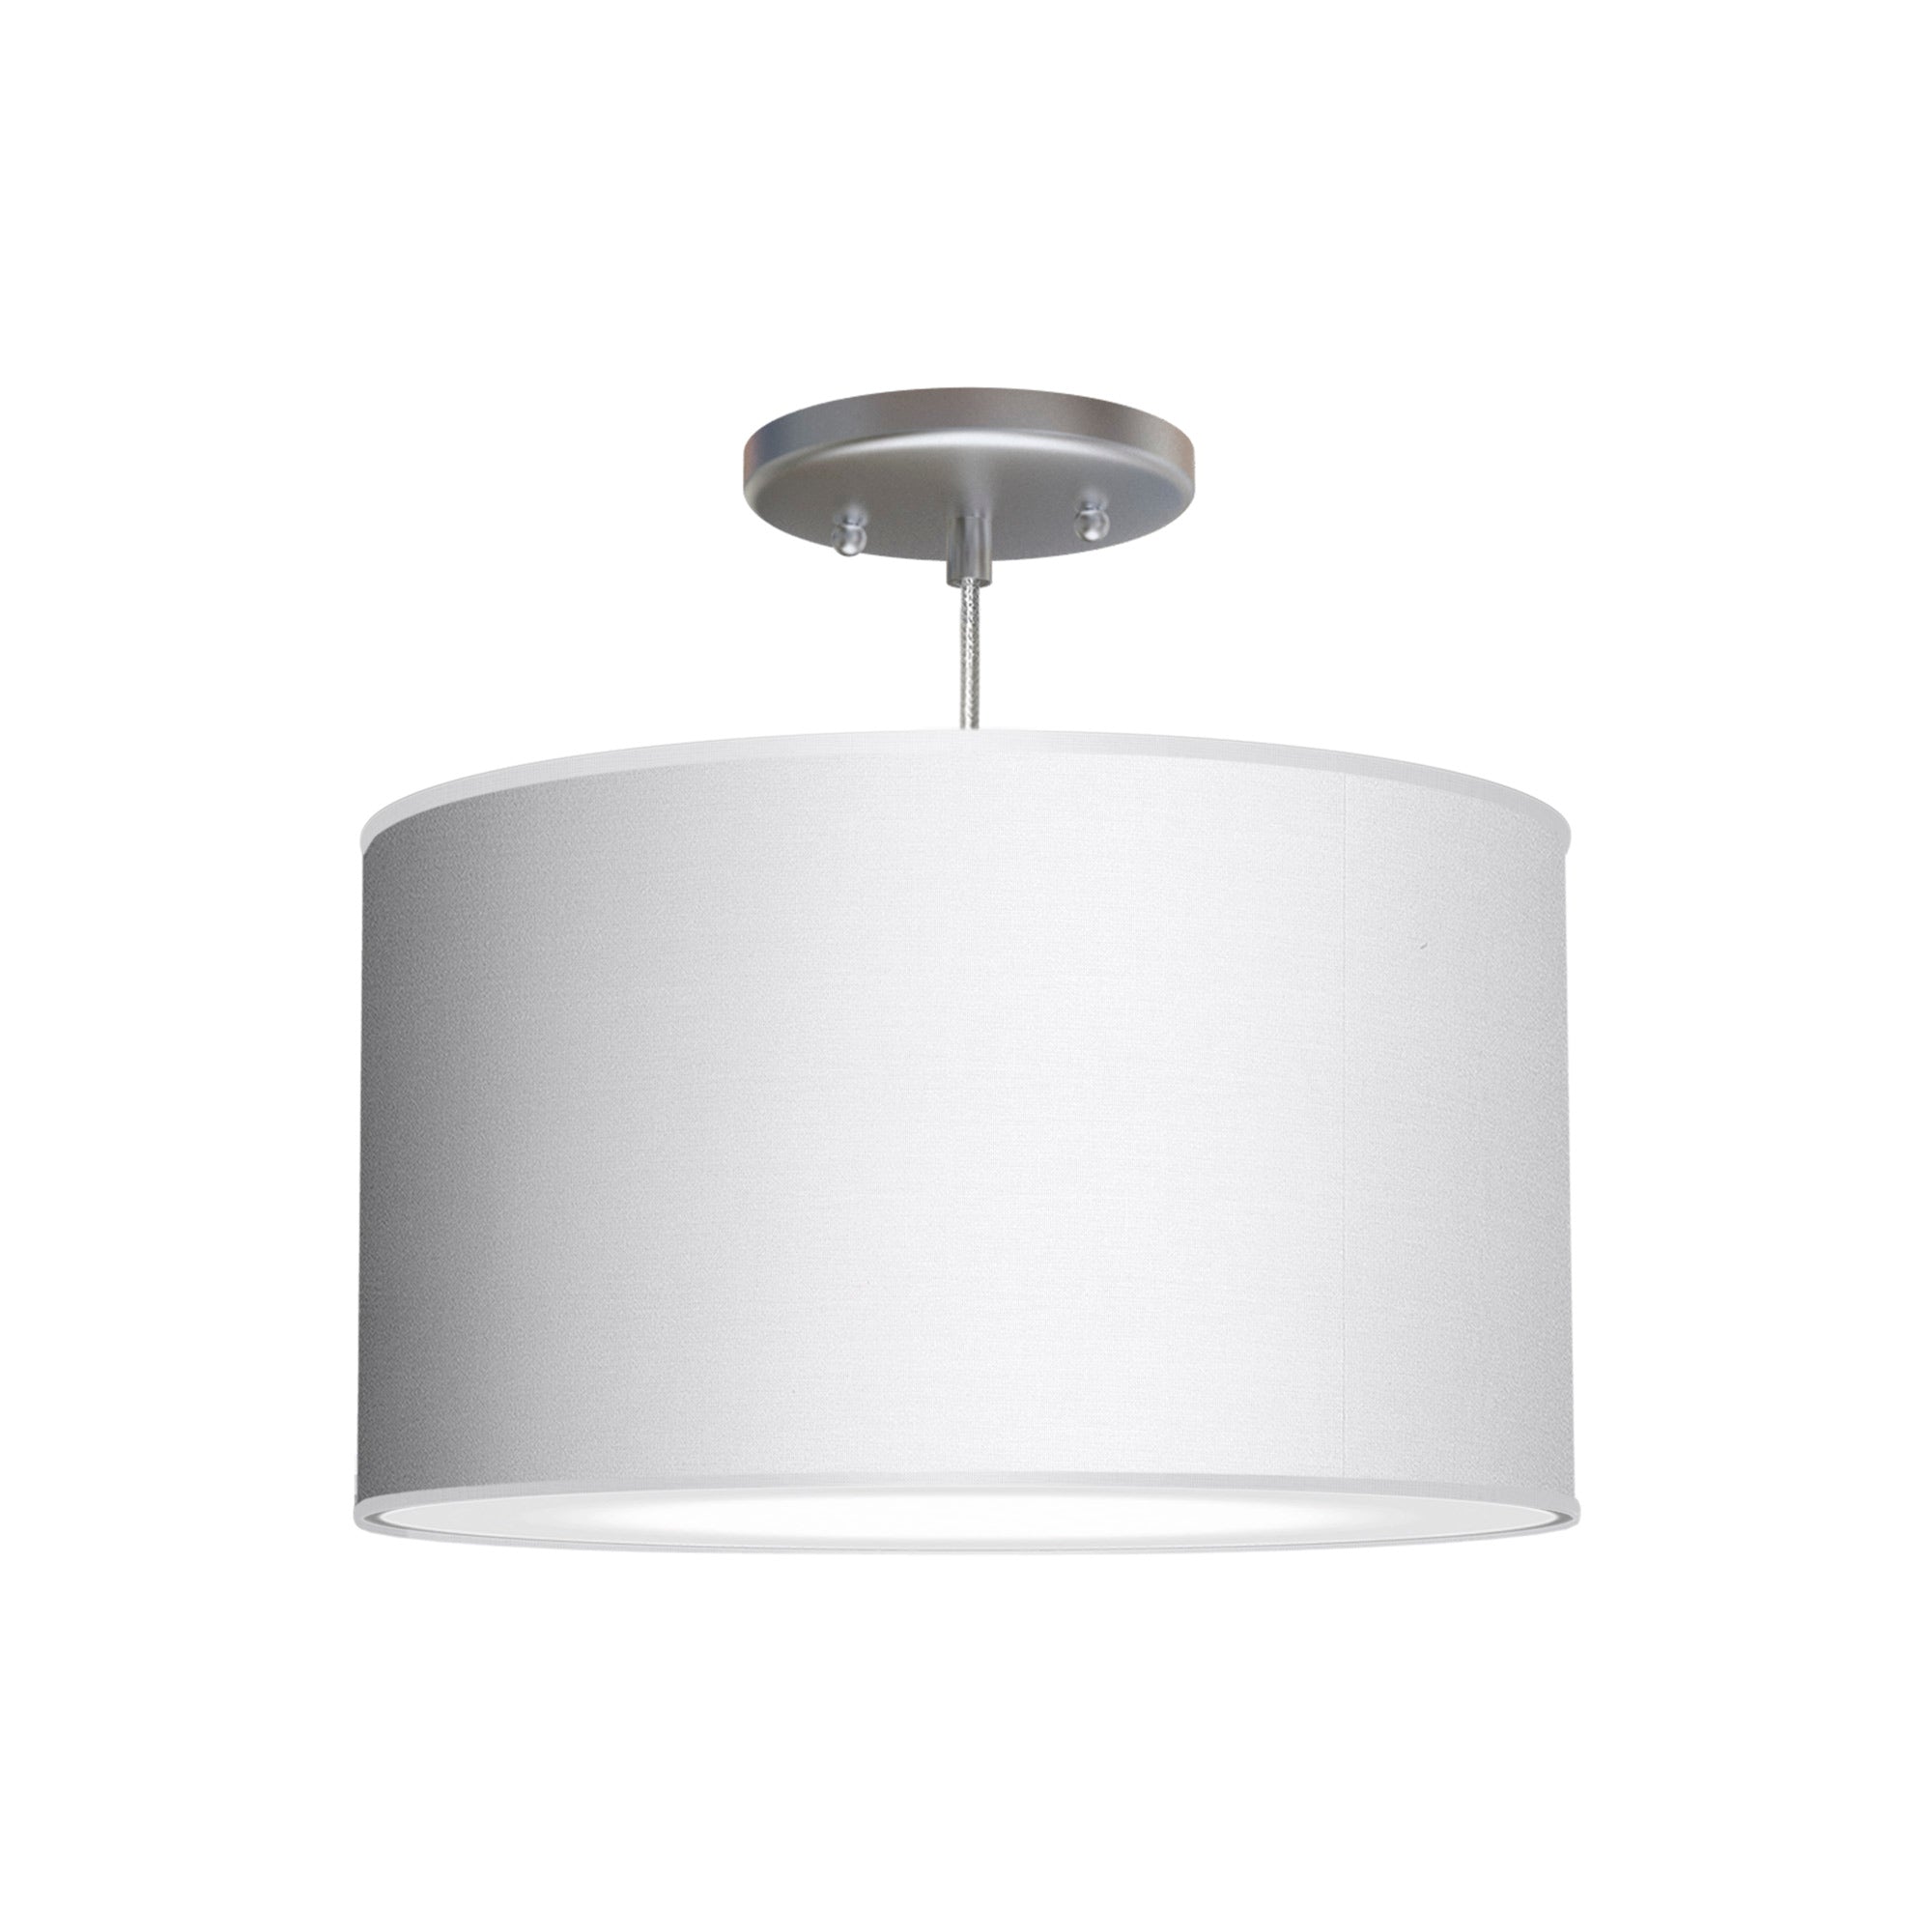 The Gab Hanging Lamp from Seascape Fixtures with a linen shade in white color.